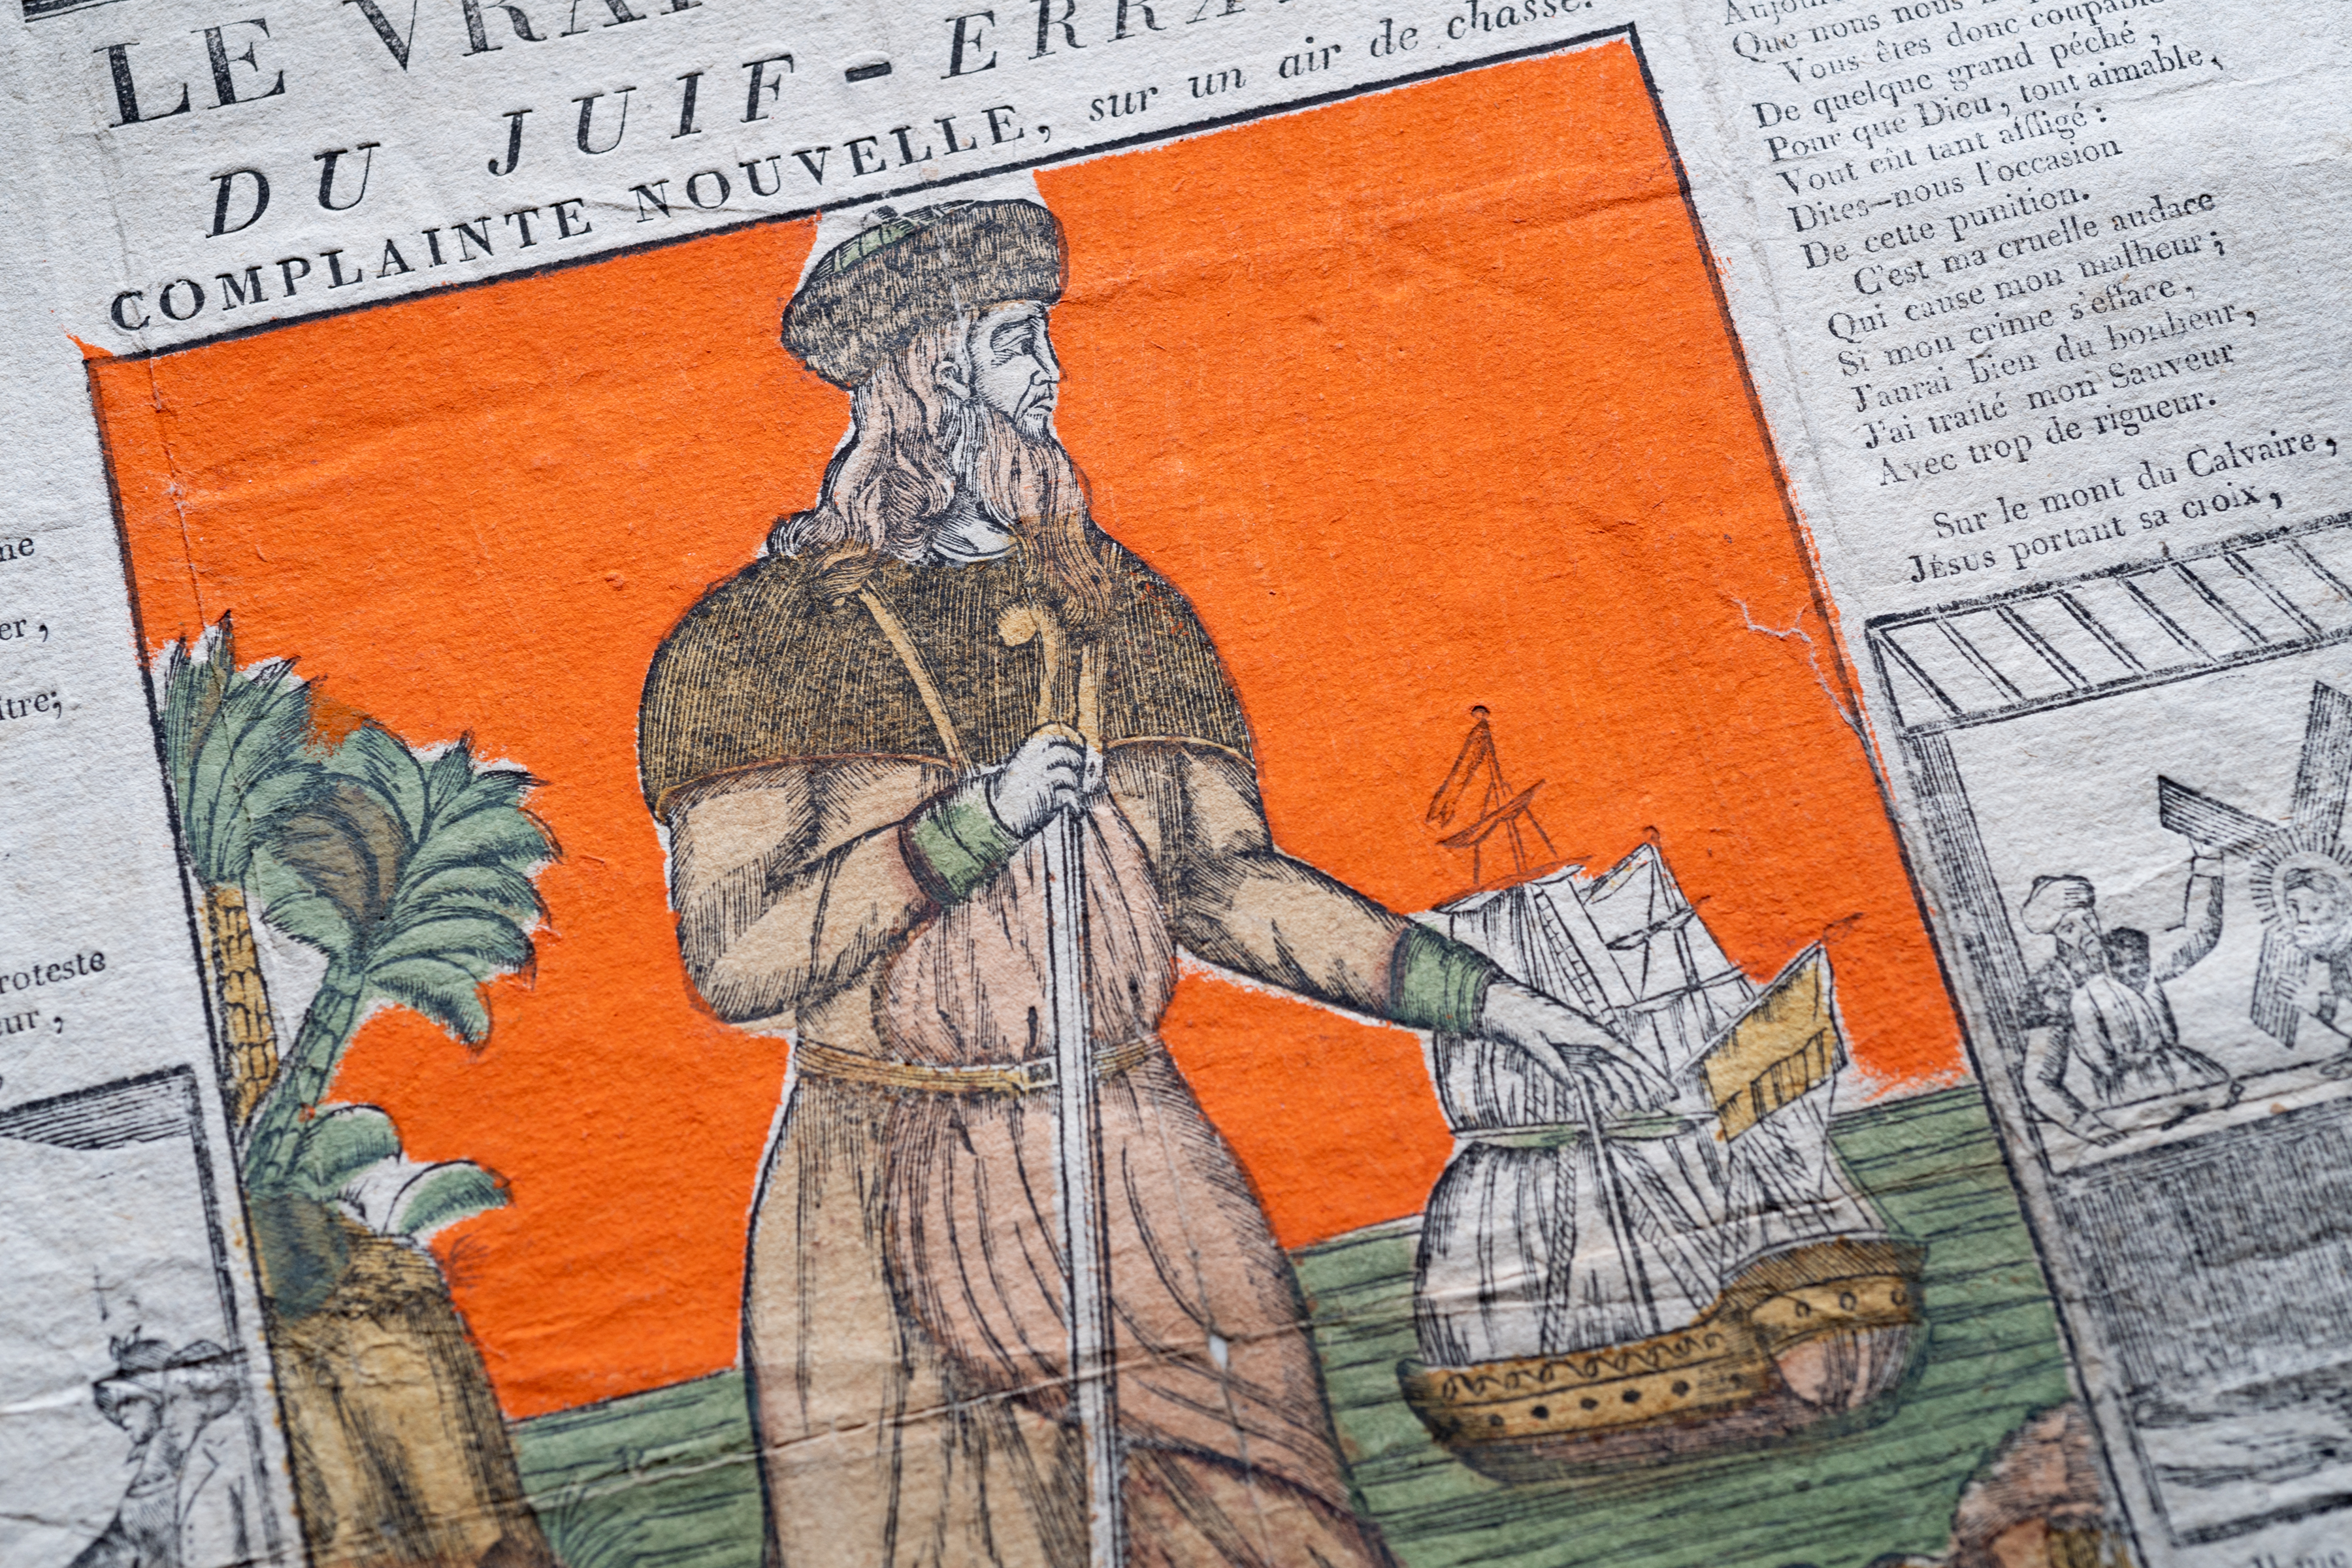 A hand-colored woodcut depicts a man with a walking stick. In the background a ship and palm trees are visible. Some text in French is visible.